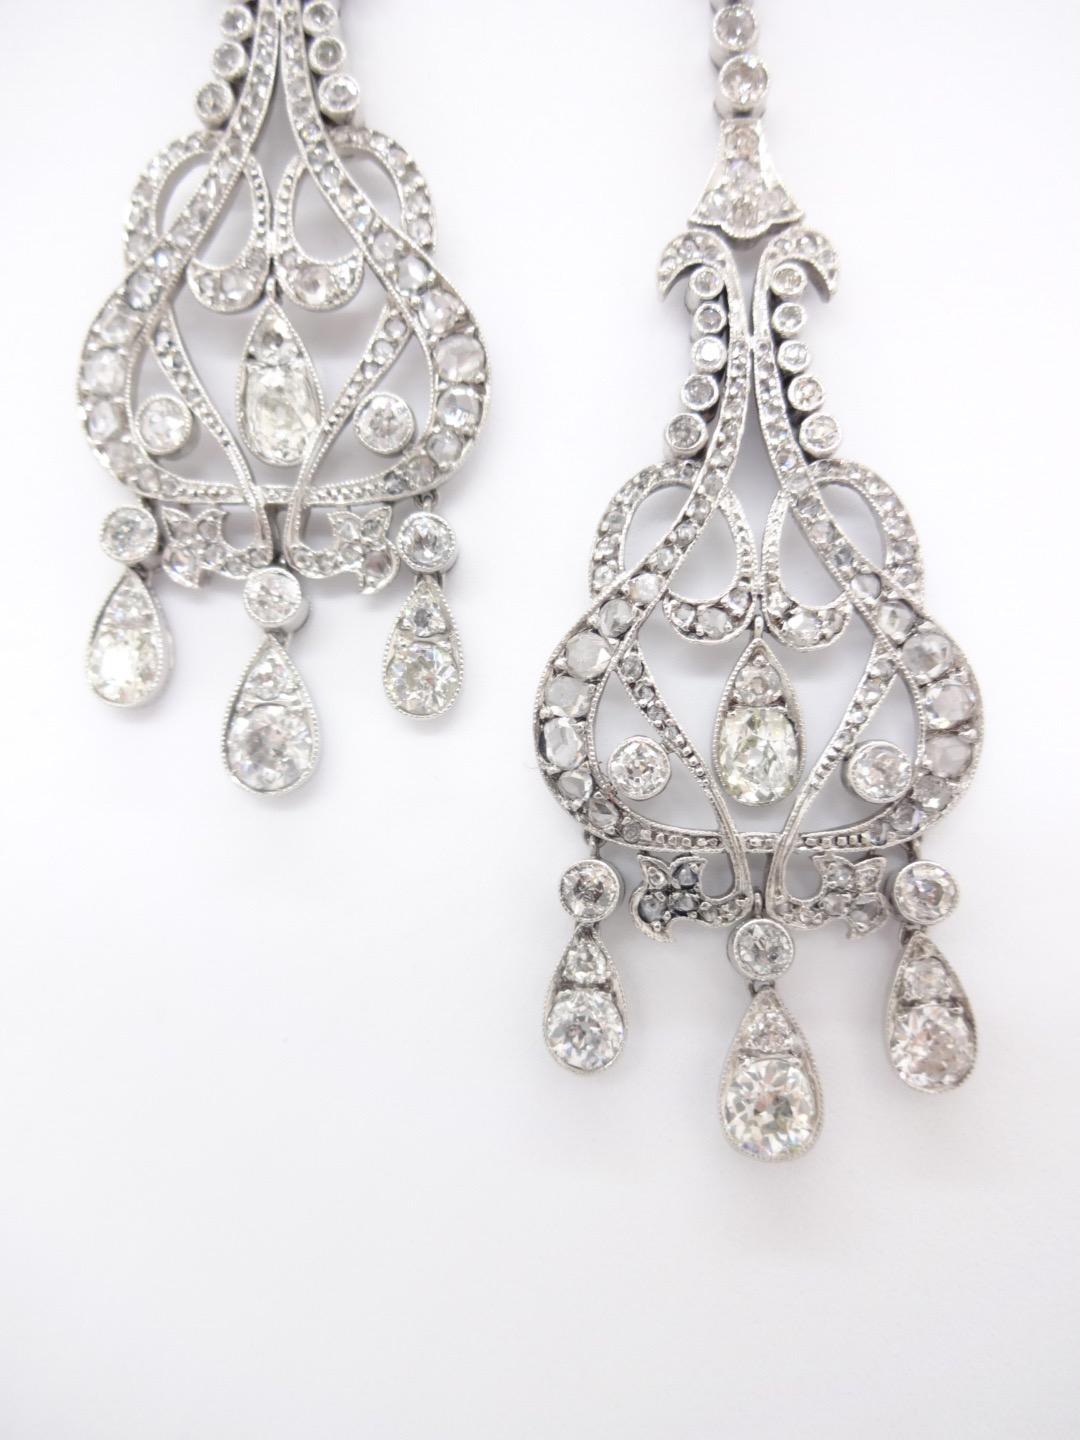 With a dramatic shapely silhouette, these chandelier earrings harken back to a bygone era.  Beautifully crafted in platinum with 8.50 carats of beautiful bright white diamonds, you'll find a million things to wear this with from leather bomber